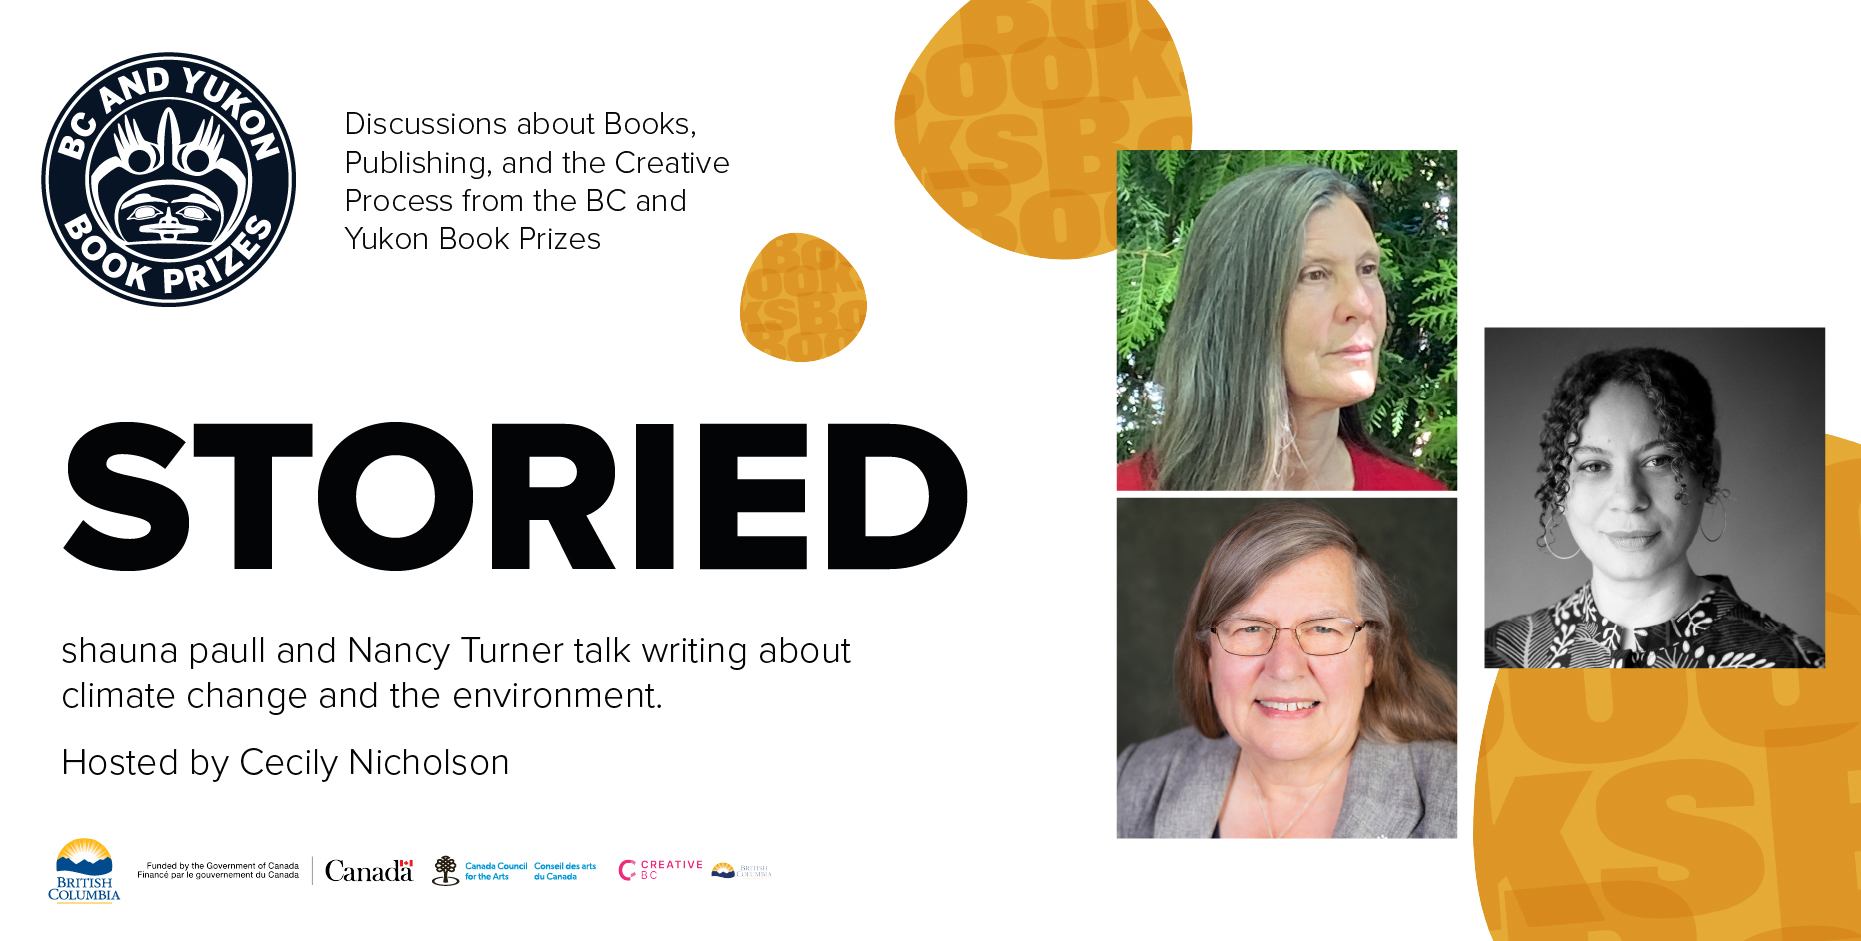 Storied: On Writing about Climate Change and the Environment with shauna paull and Nancy Turner